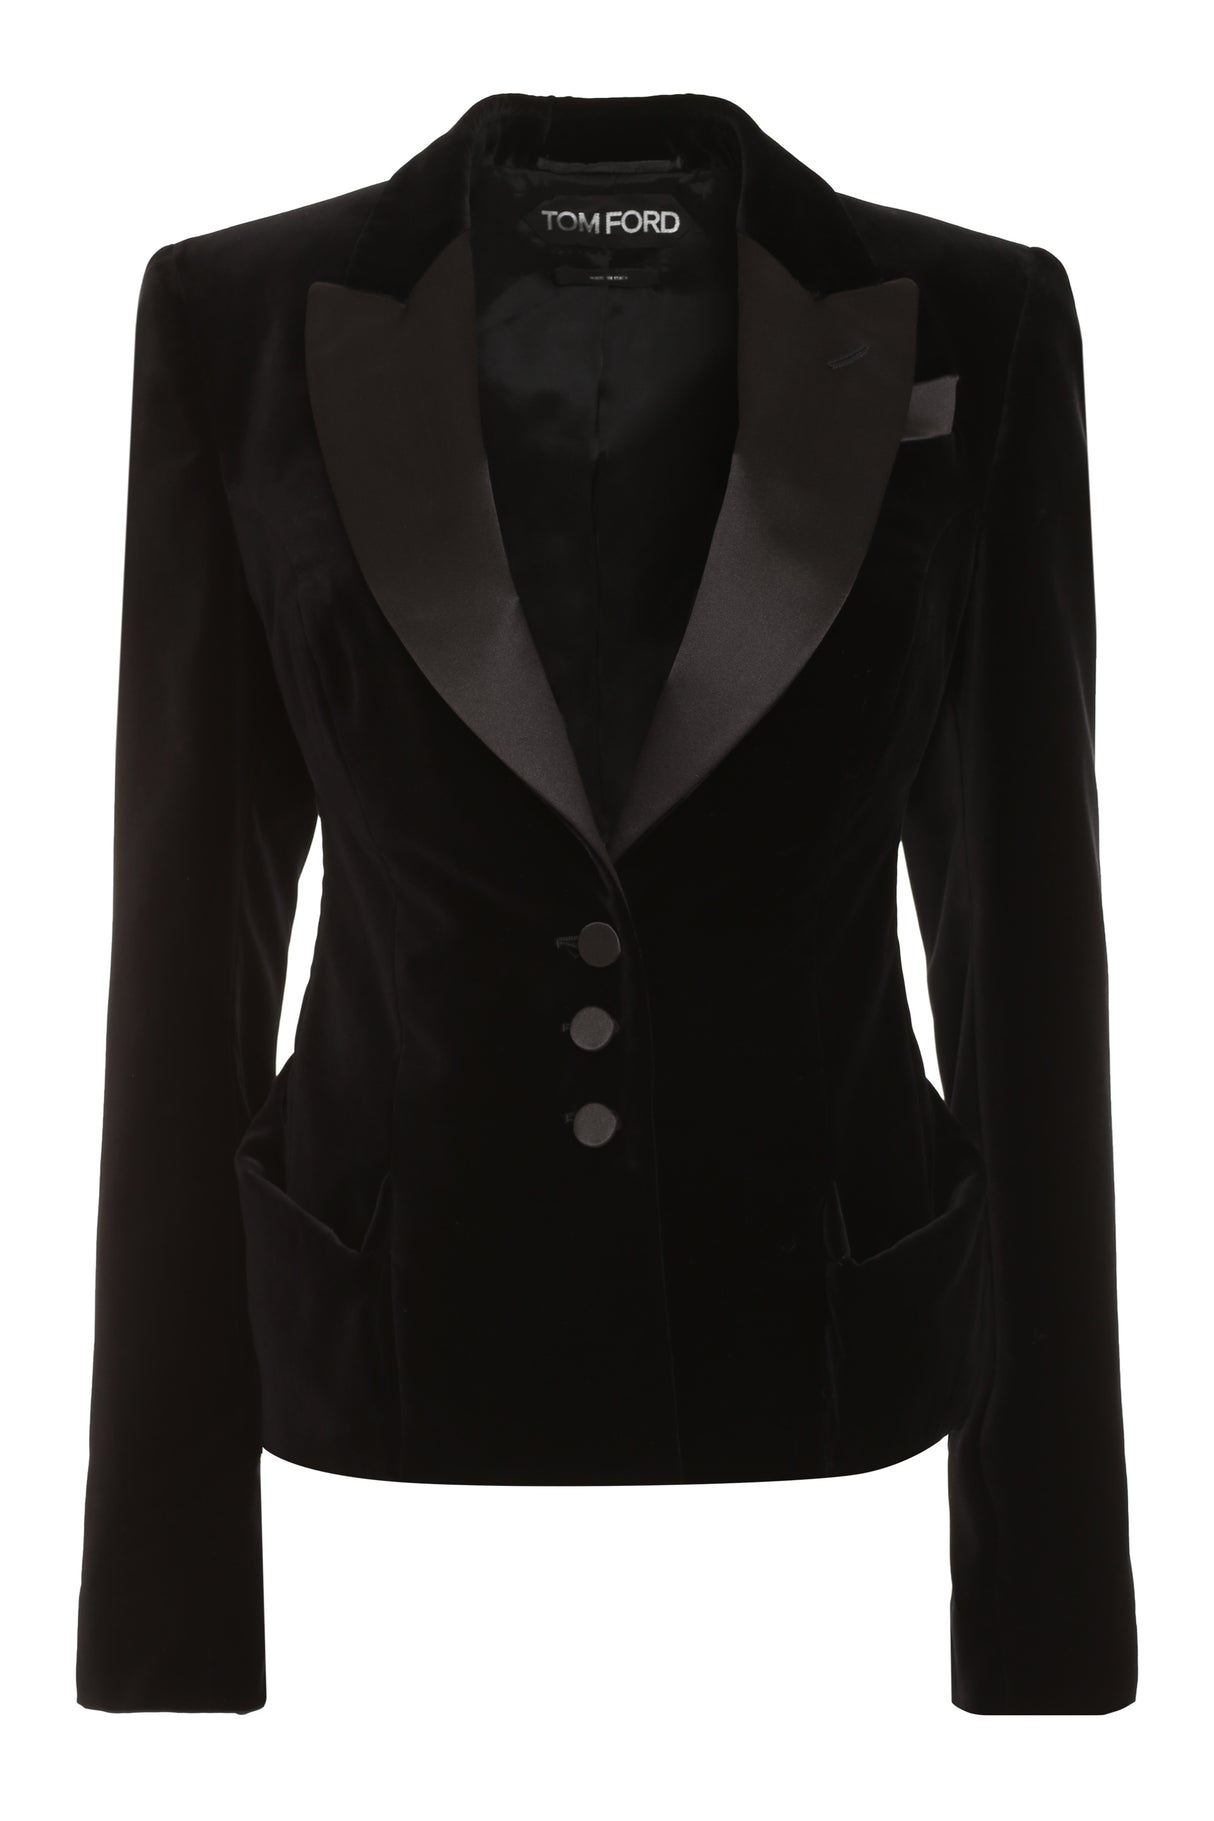 TOM FORD Luxurious Black Velvet Blazer for Women with Satin Lapel Collar and Slit Cuffs